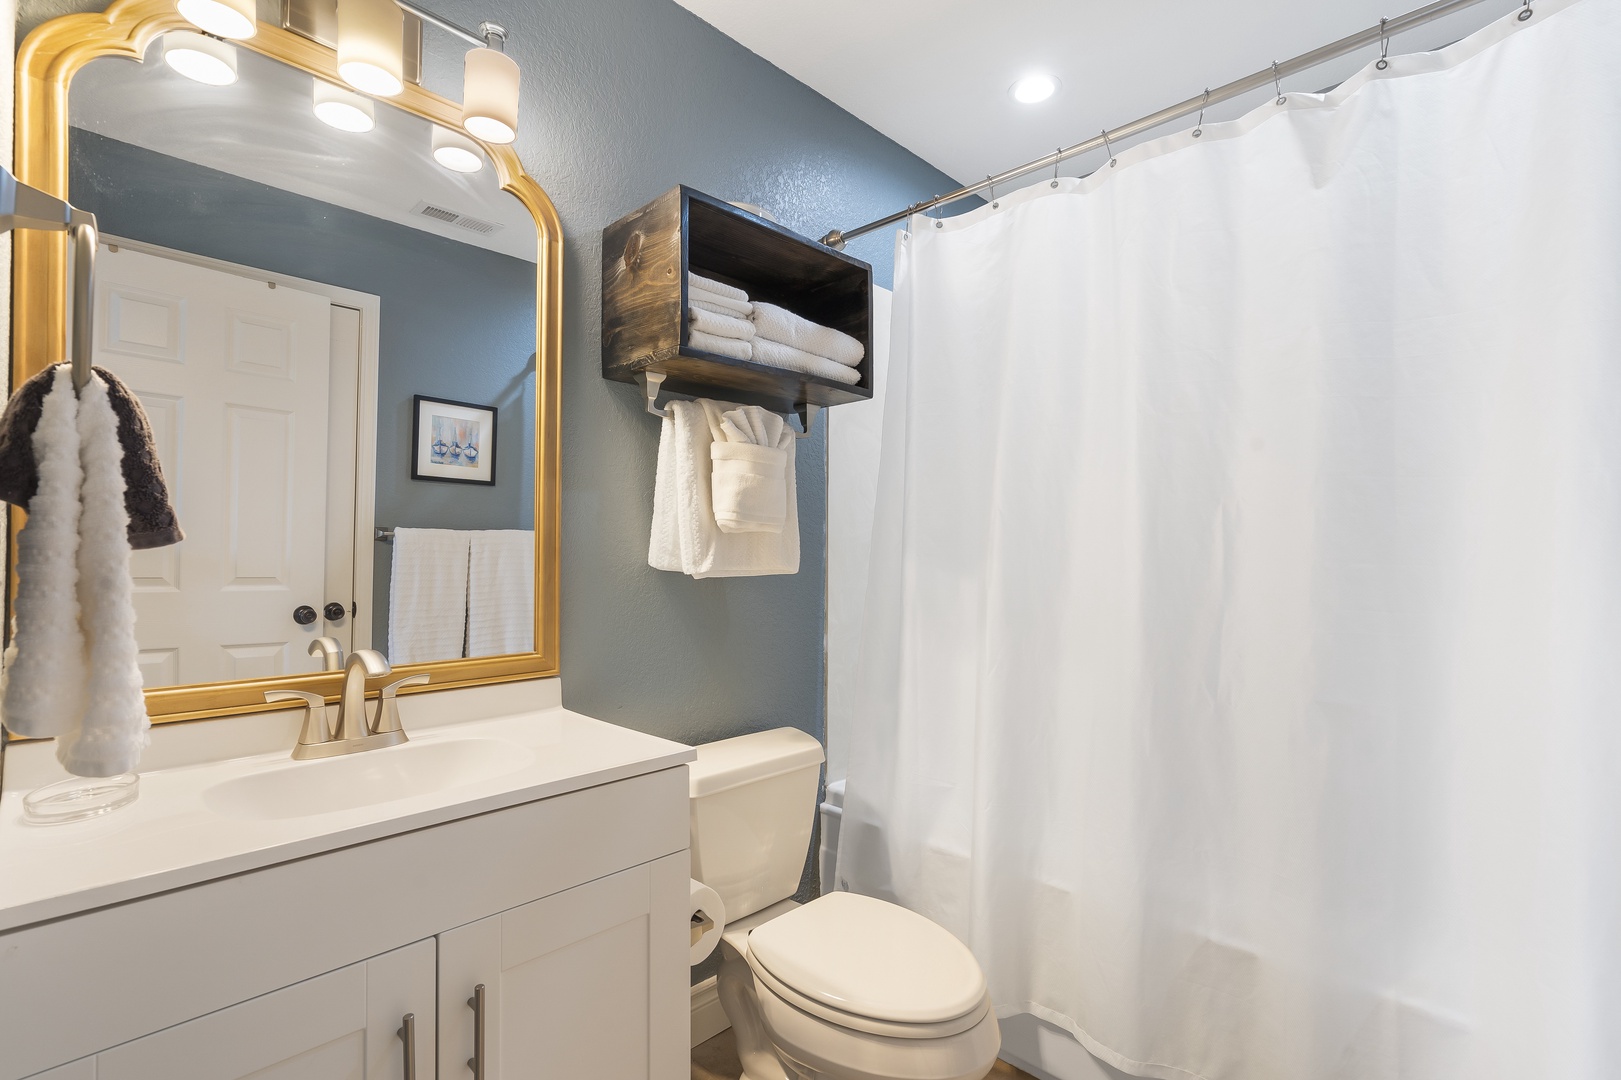 A single vanity & shower/tub combo await in the king ensuite bath